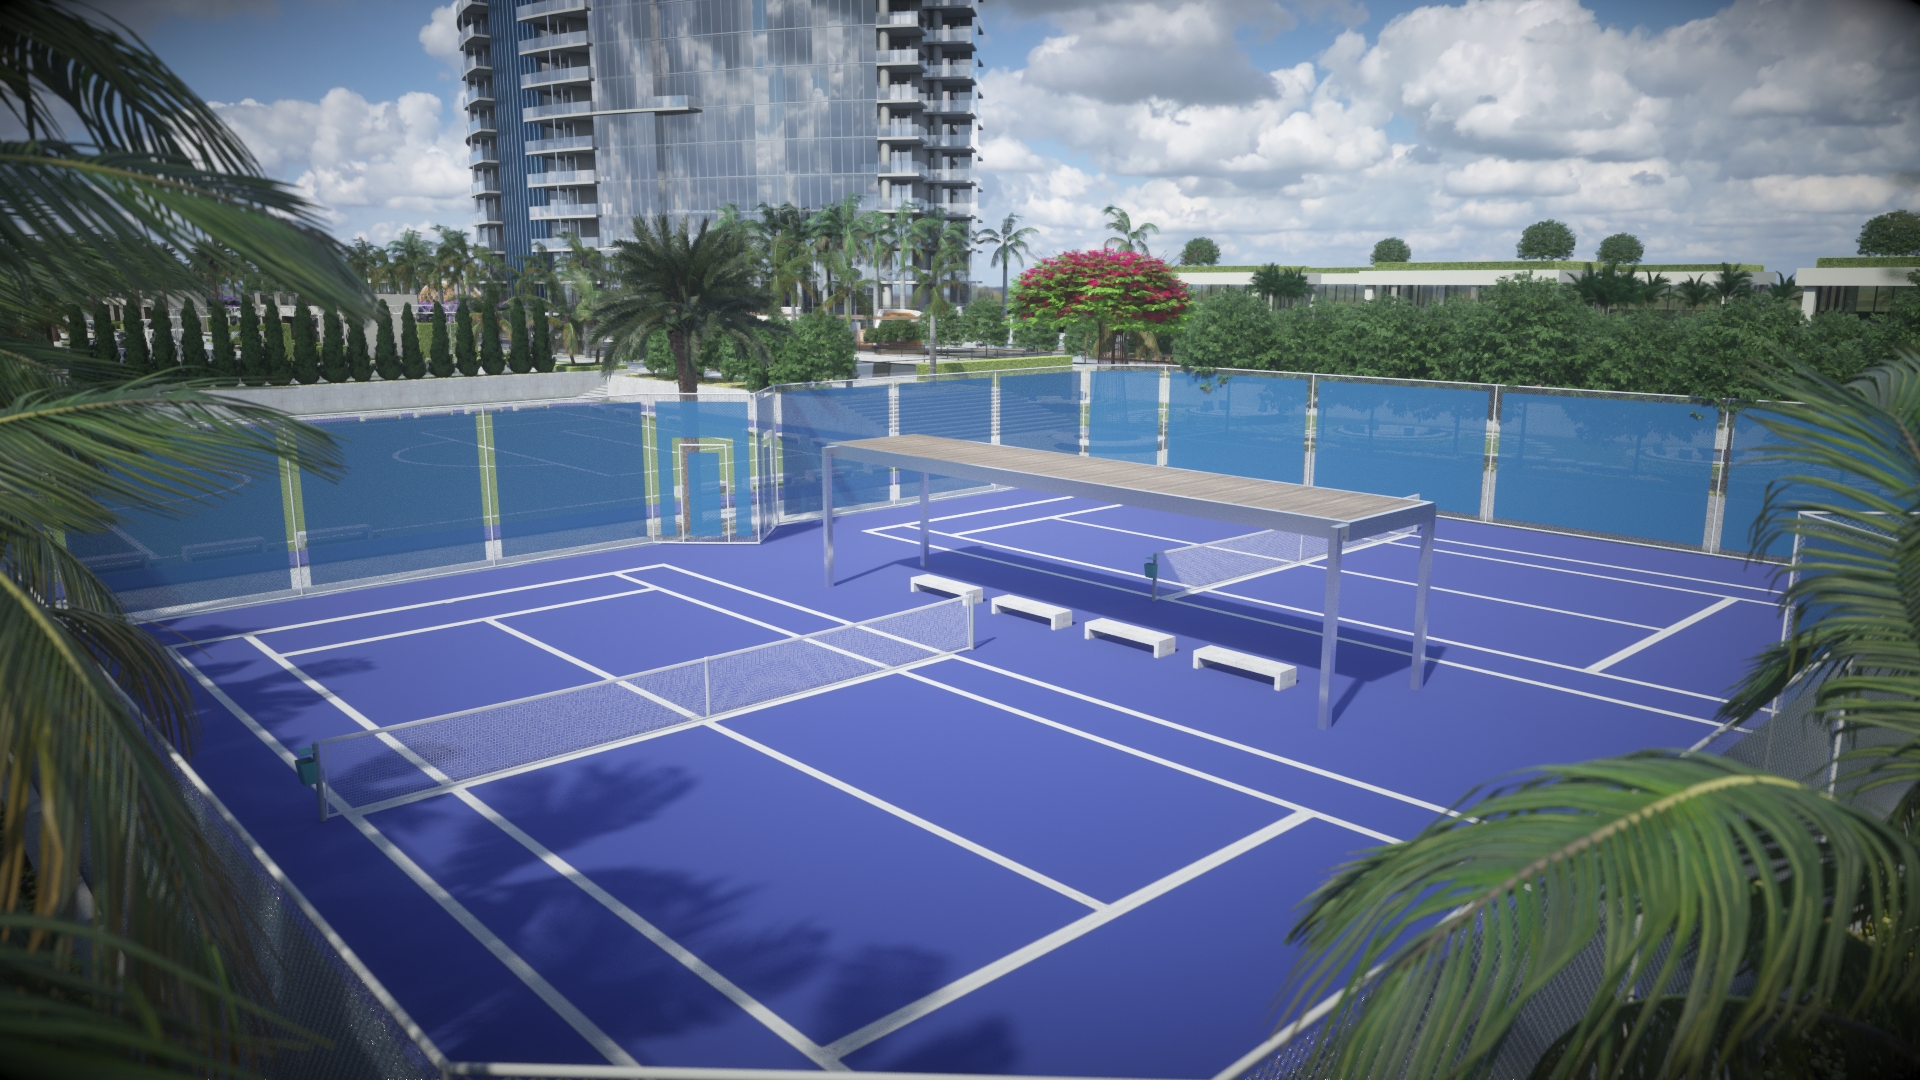 Rendering of Paramount Miami Worldcenter's tennis courts